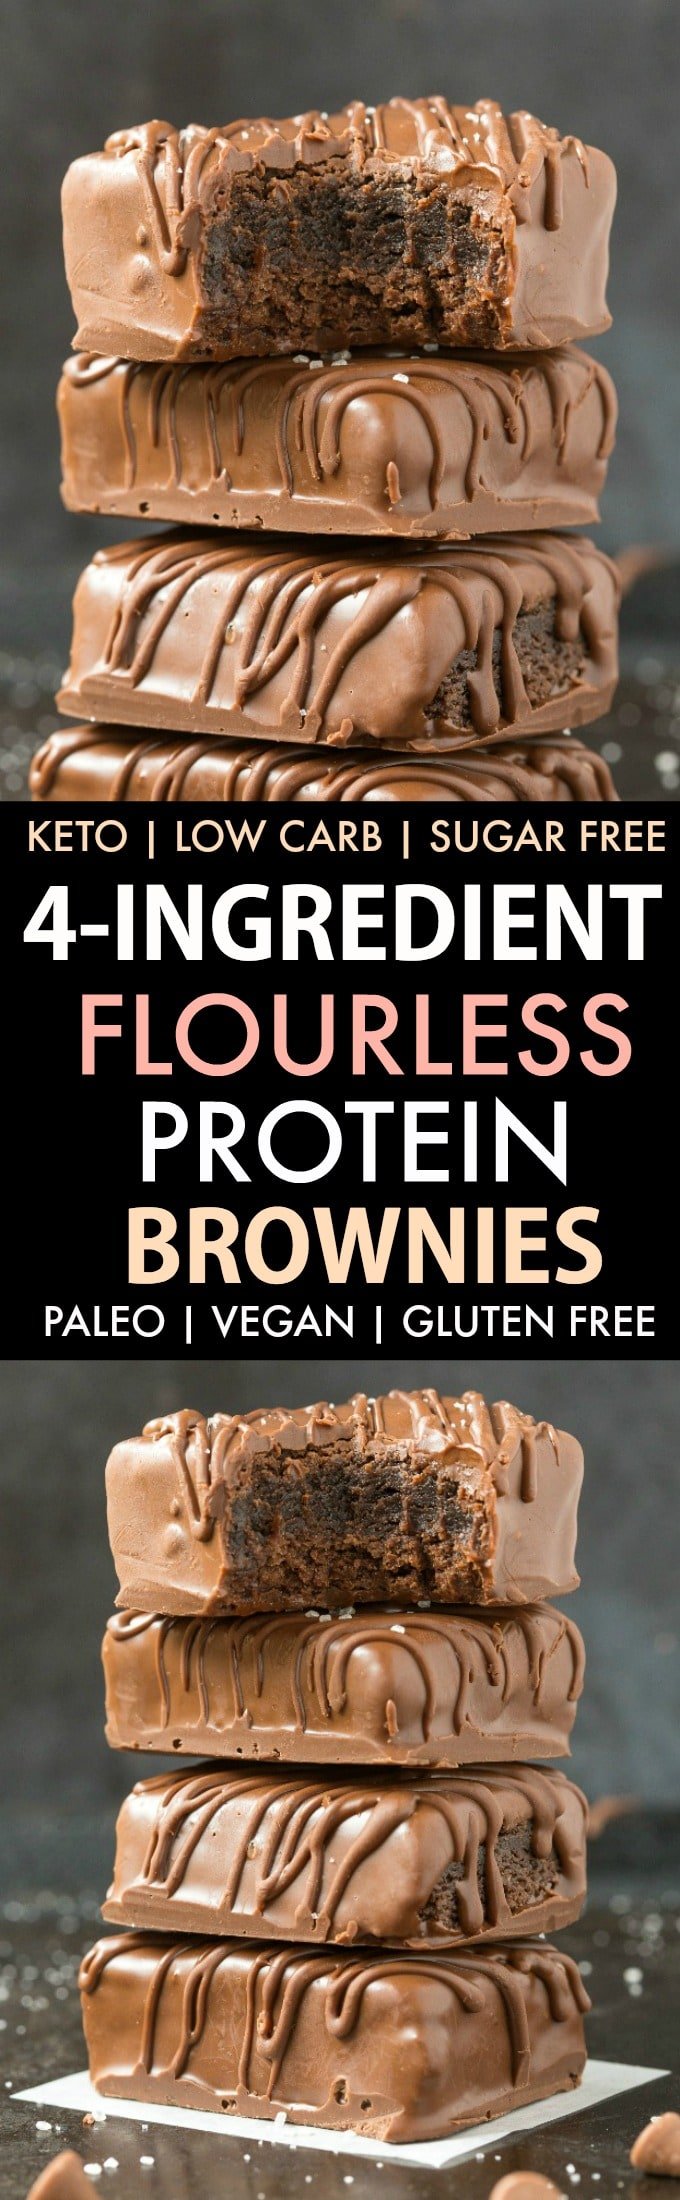 Flourless 4-Ingredient Keto Protein Brownies in a collage